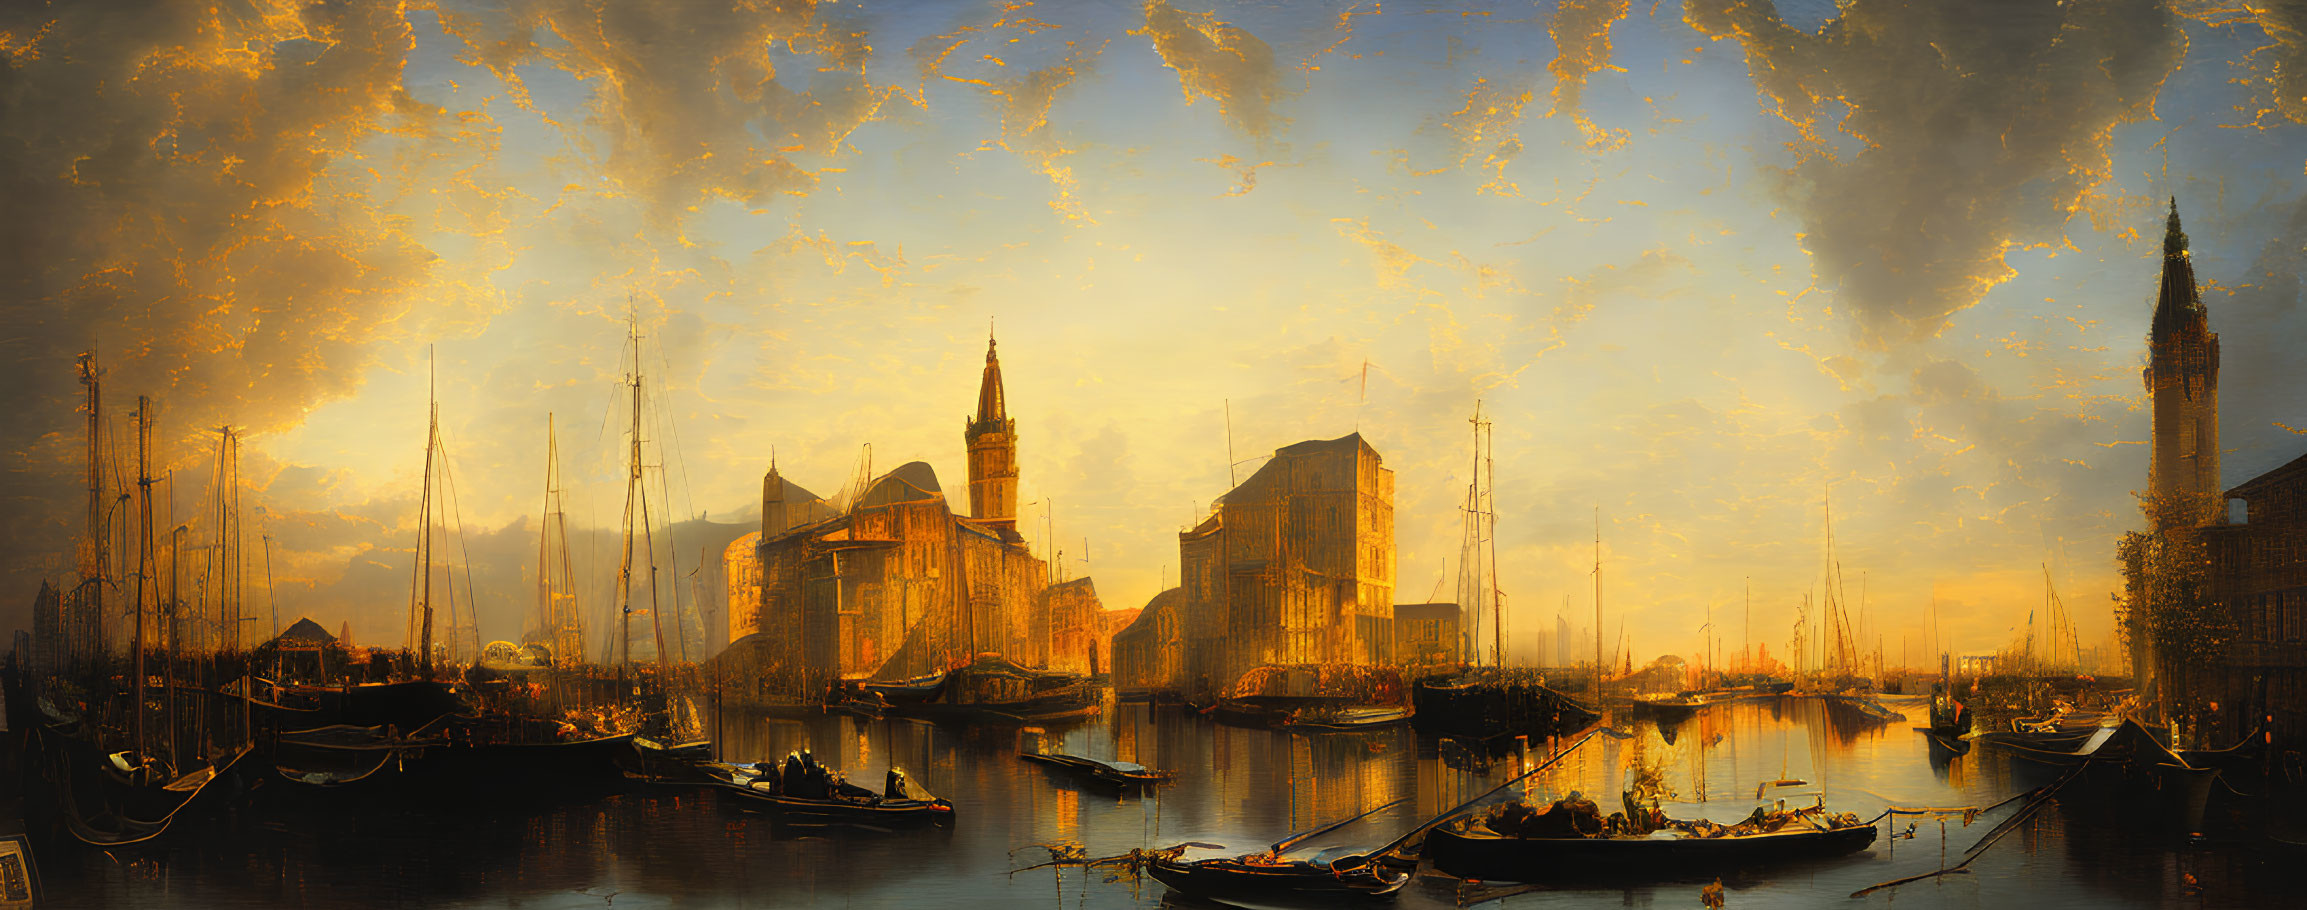 Golden-hued painting of bustling harbor with boats and dramatic sky